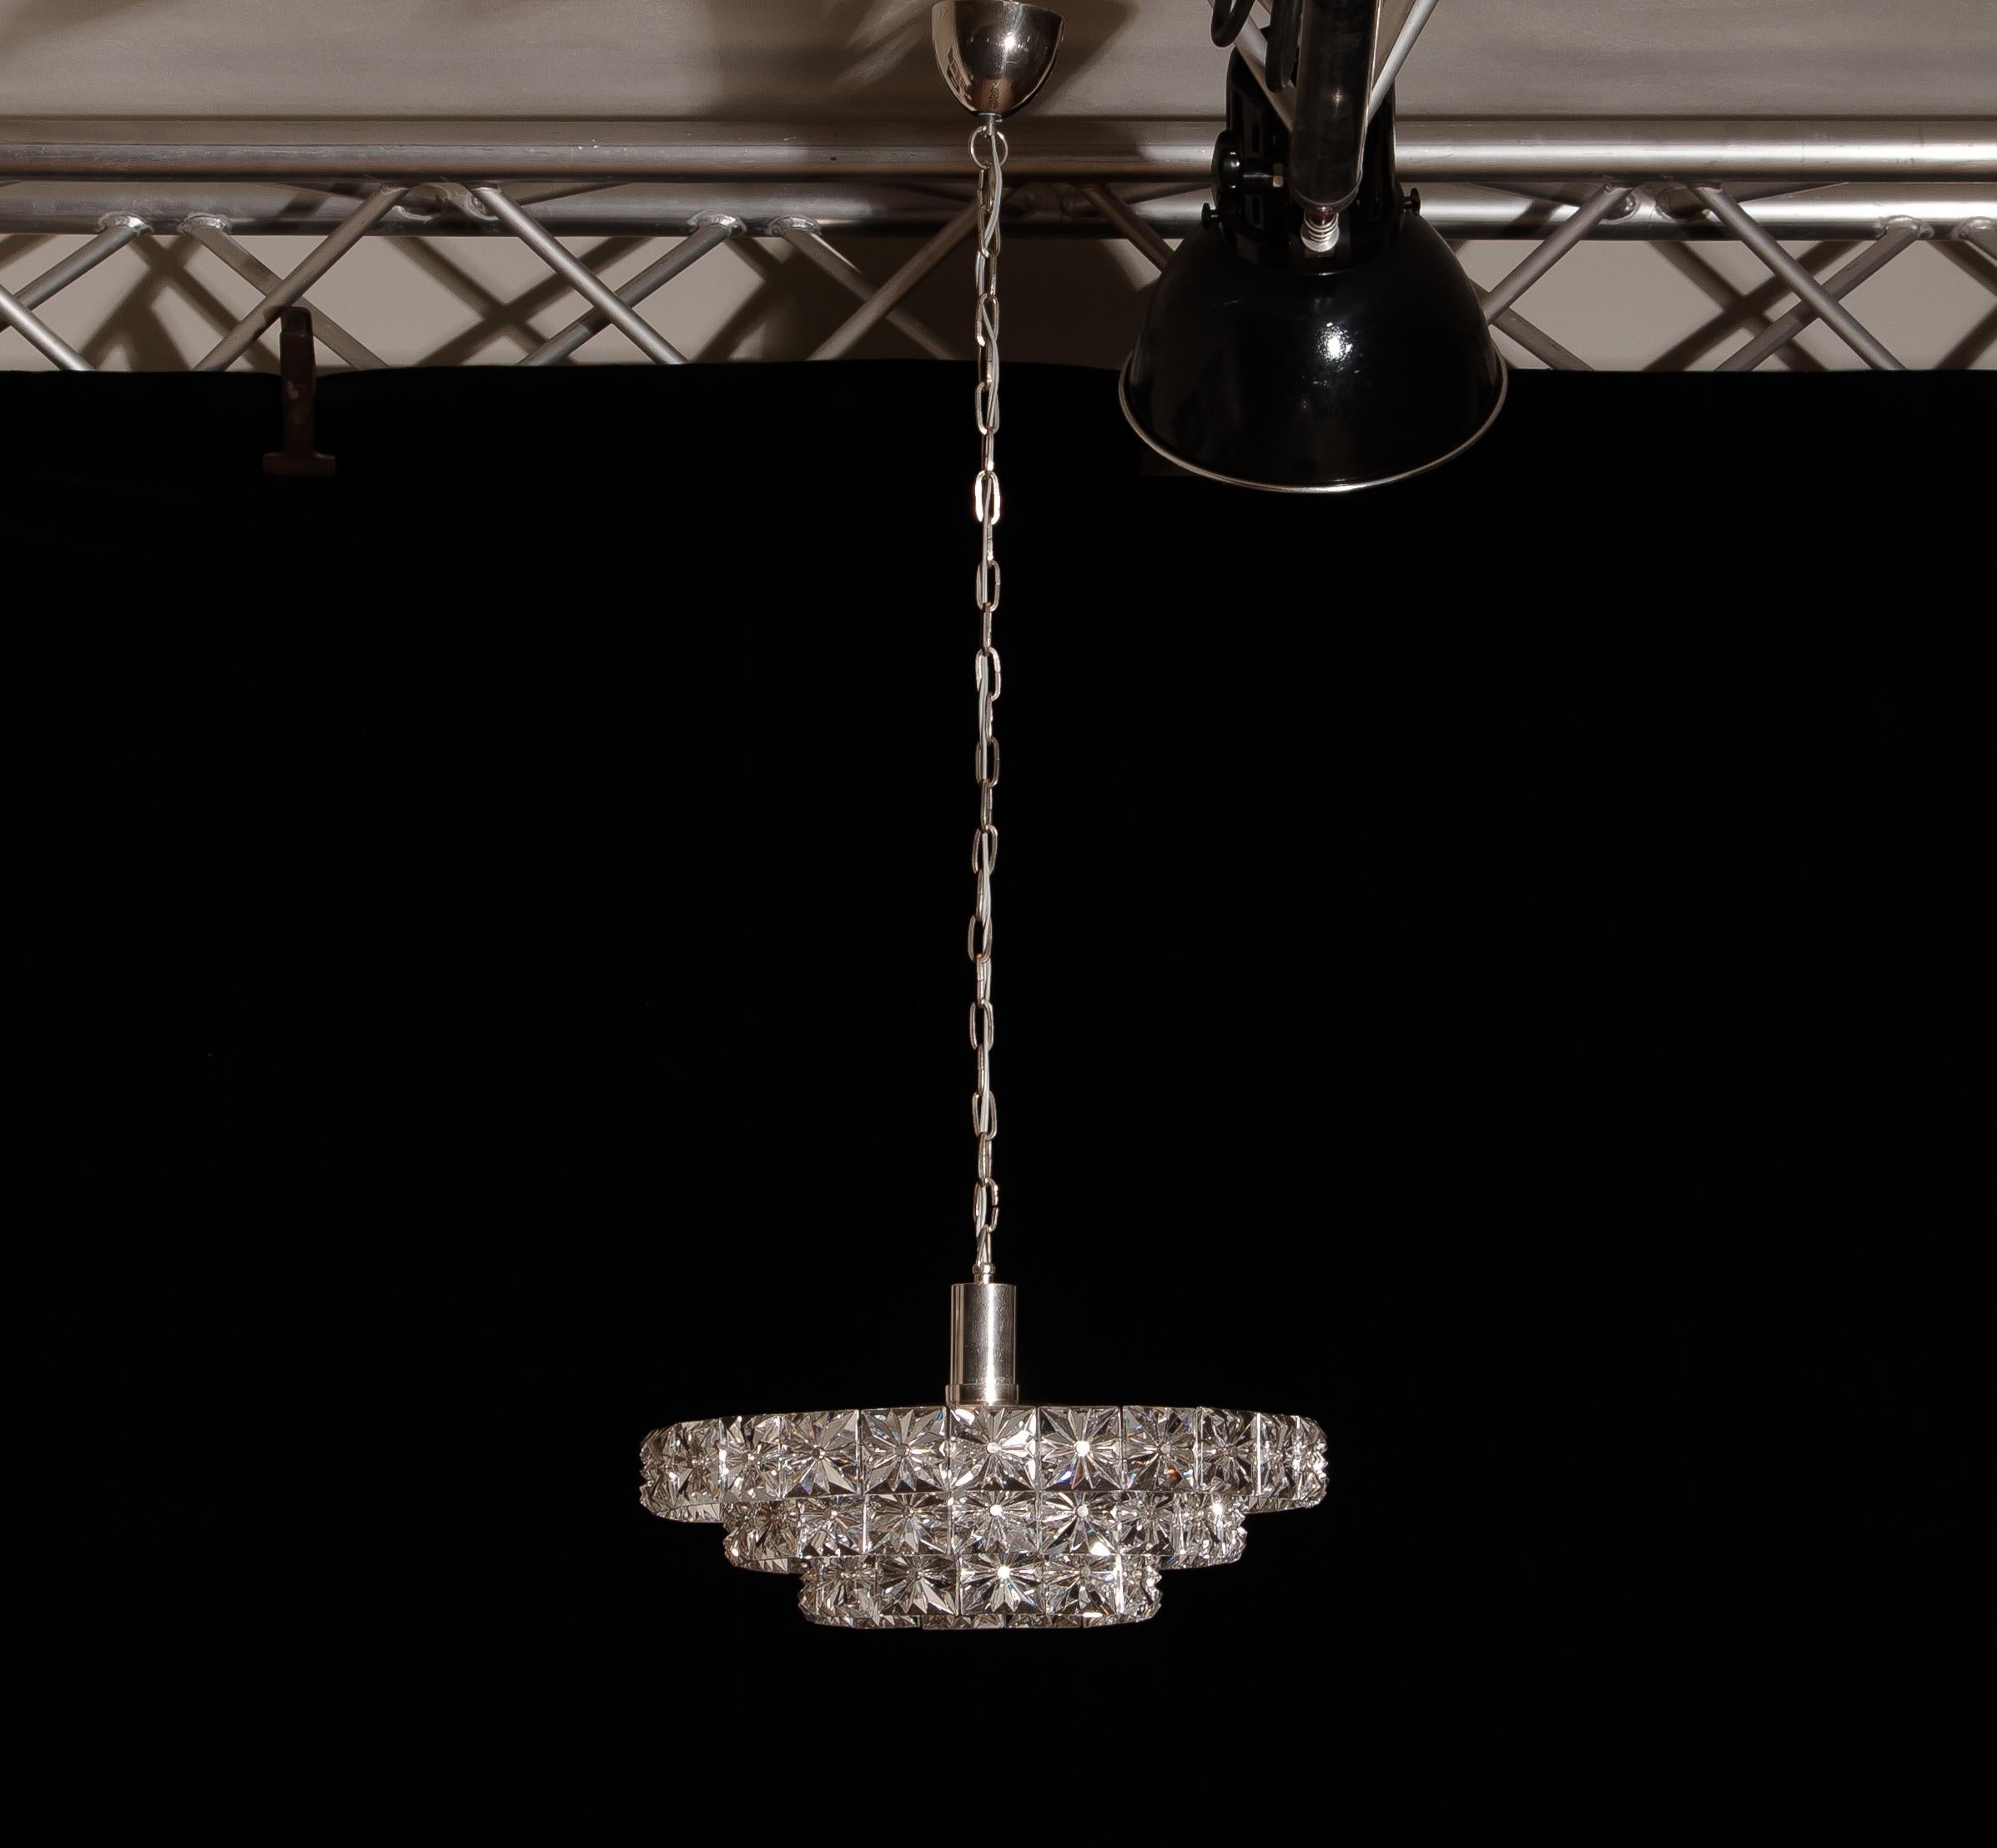 Mid-20th Century Nickel and Chrome Three-Tier Clear Crystal Chandelier / Pendant by Kinkeldey